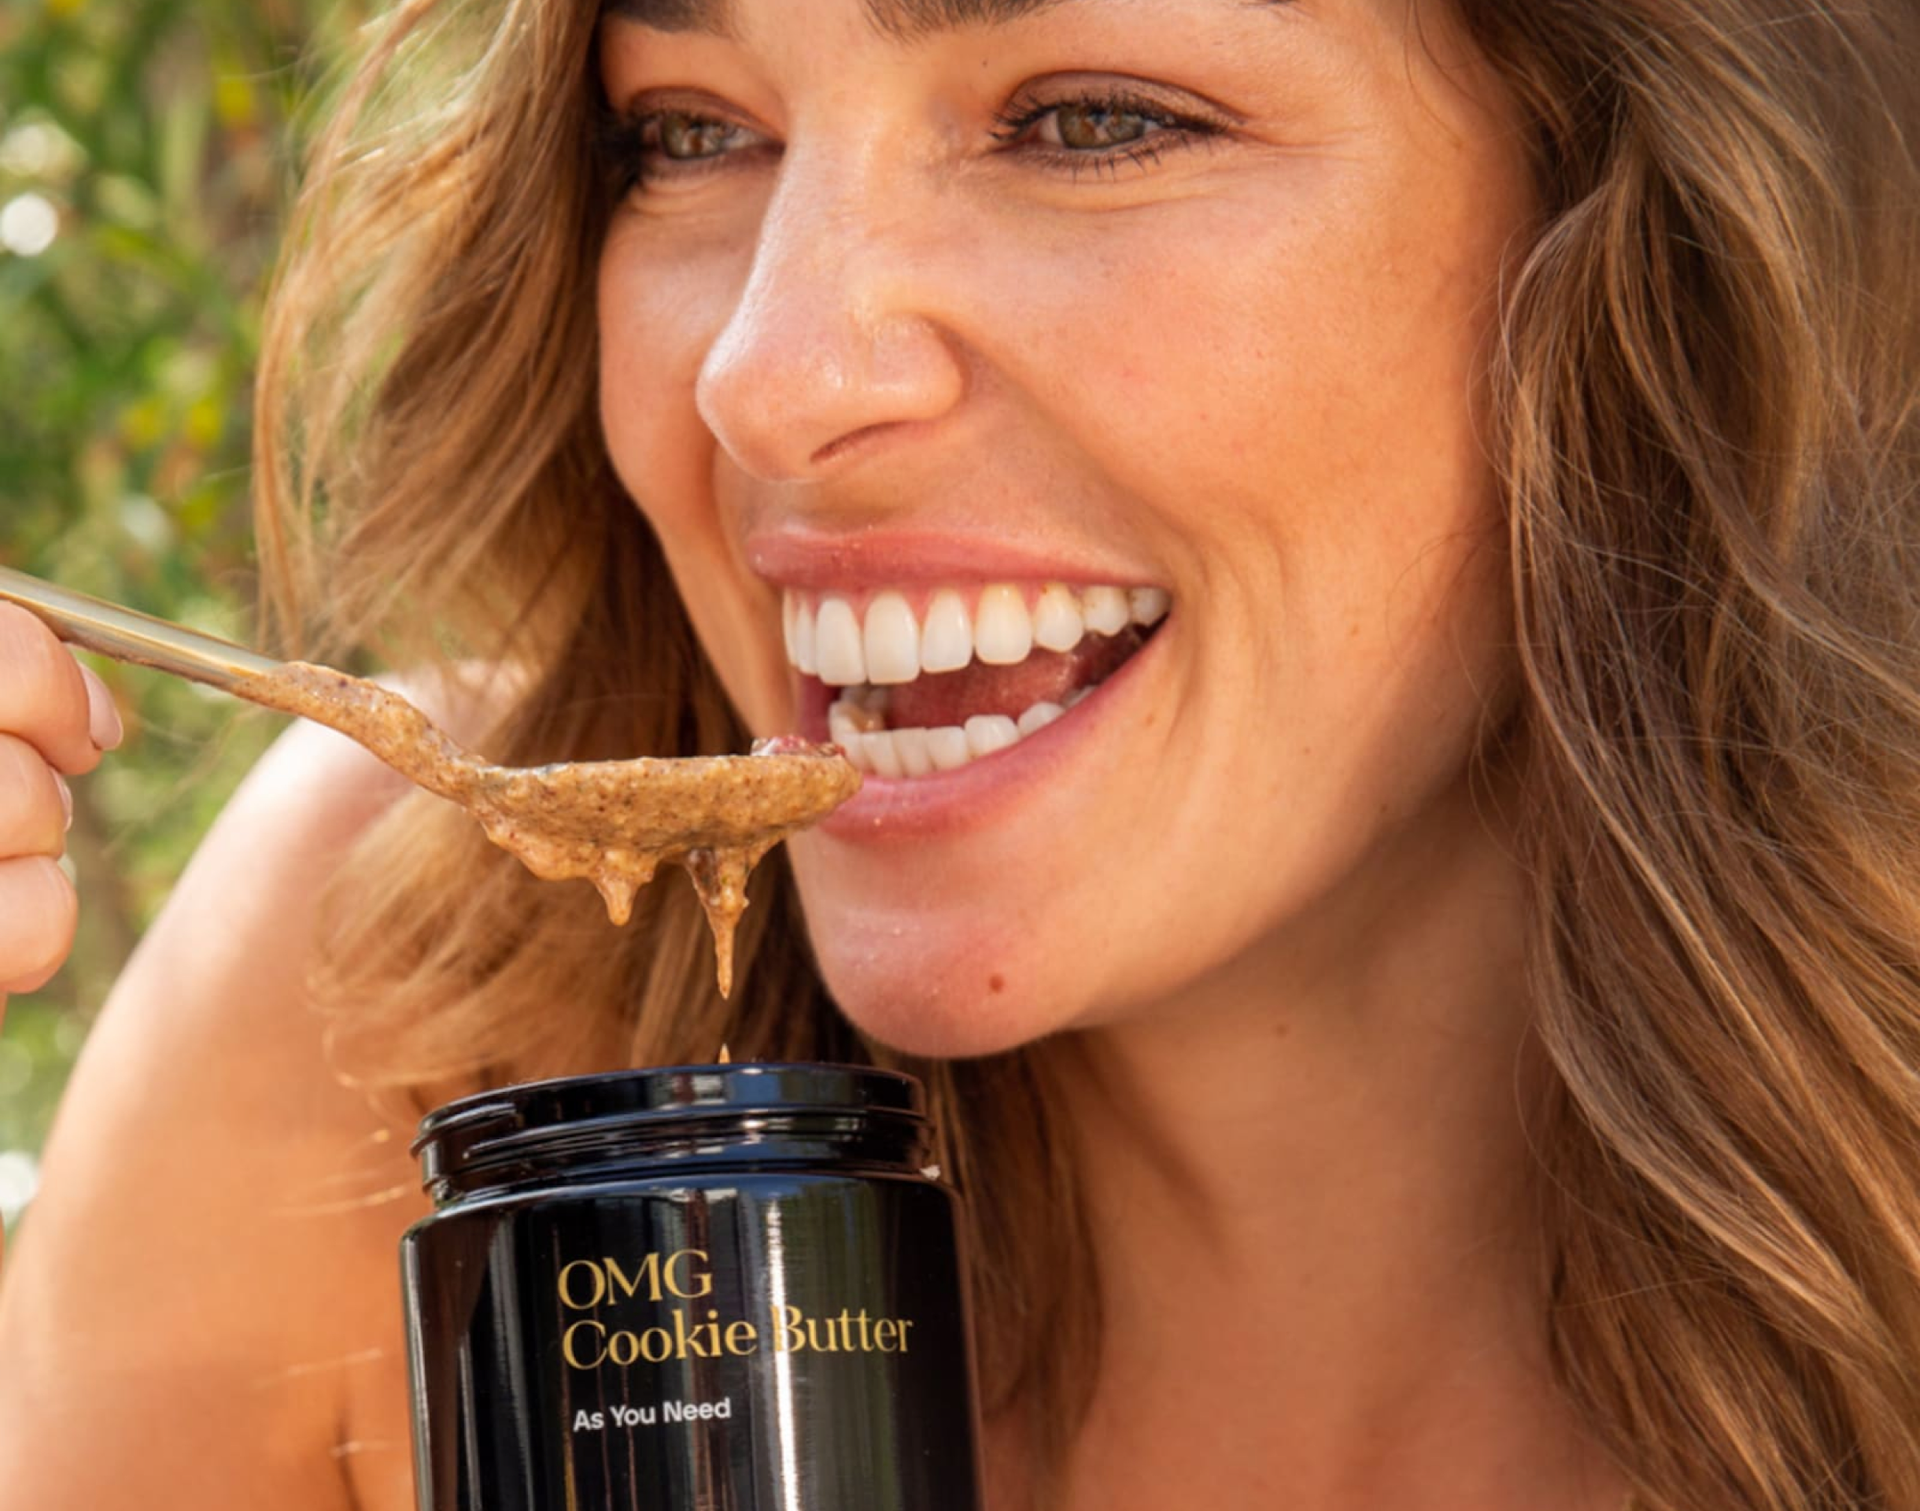 A woman with cookie butter product.